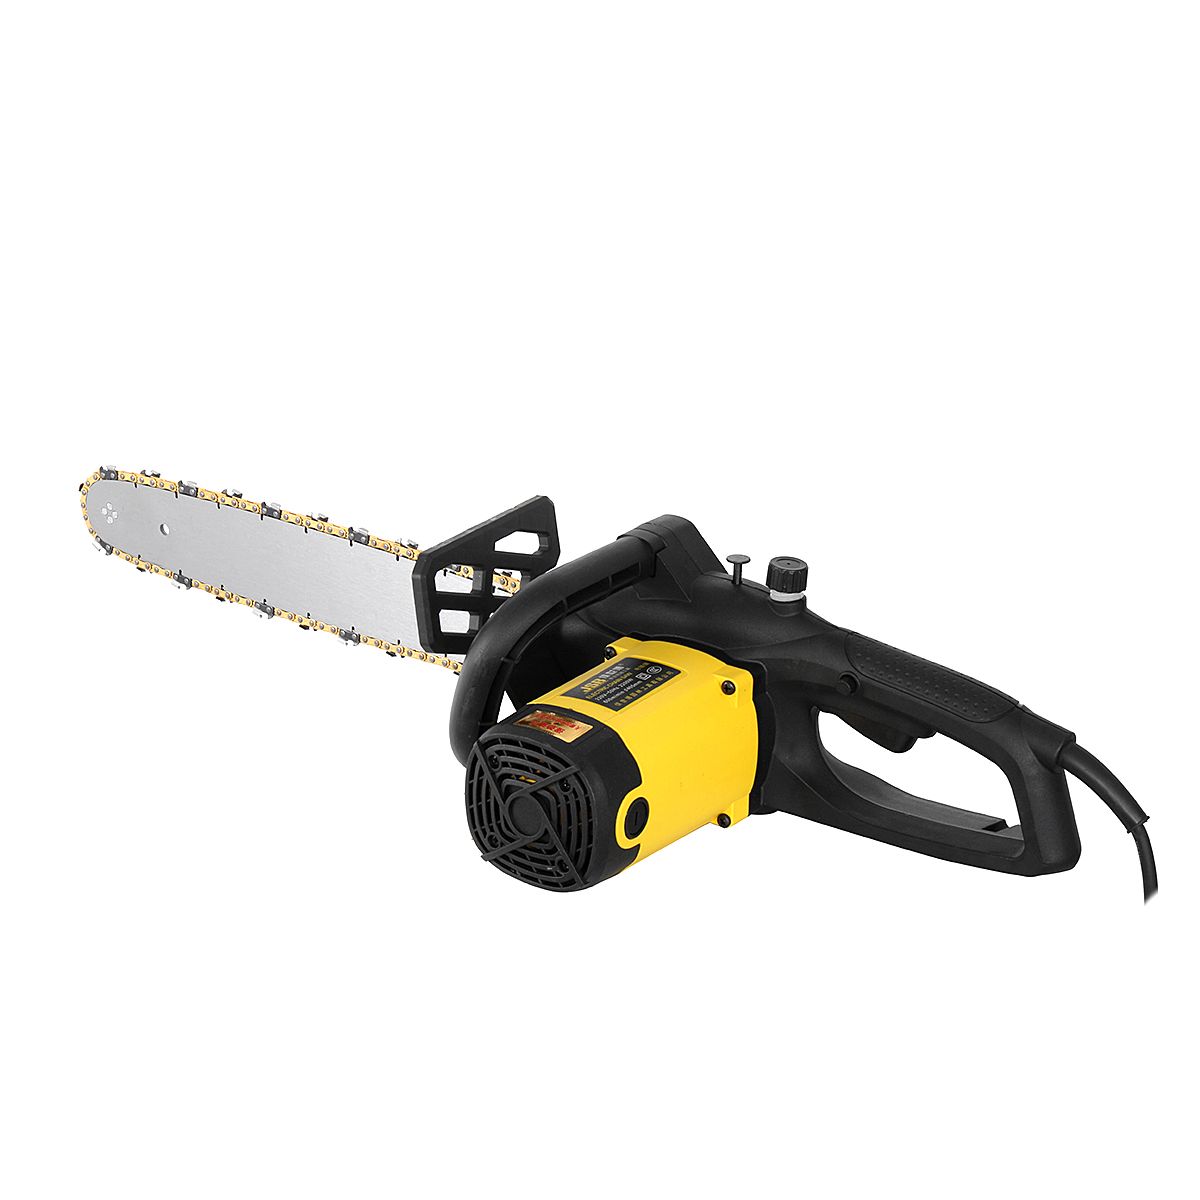 220V-2200W-Powerful-Multifunctional-Electric-Chainsaw-For-Wood-Working-Chain-Saw-Cutting-Power-Tools-1309399